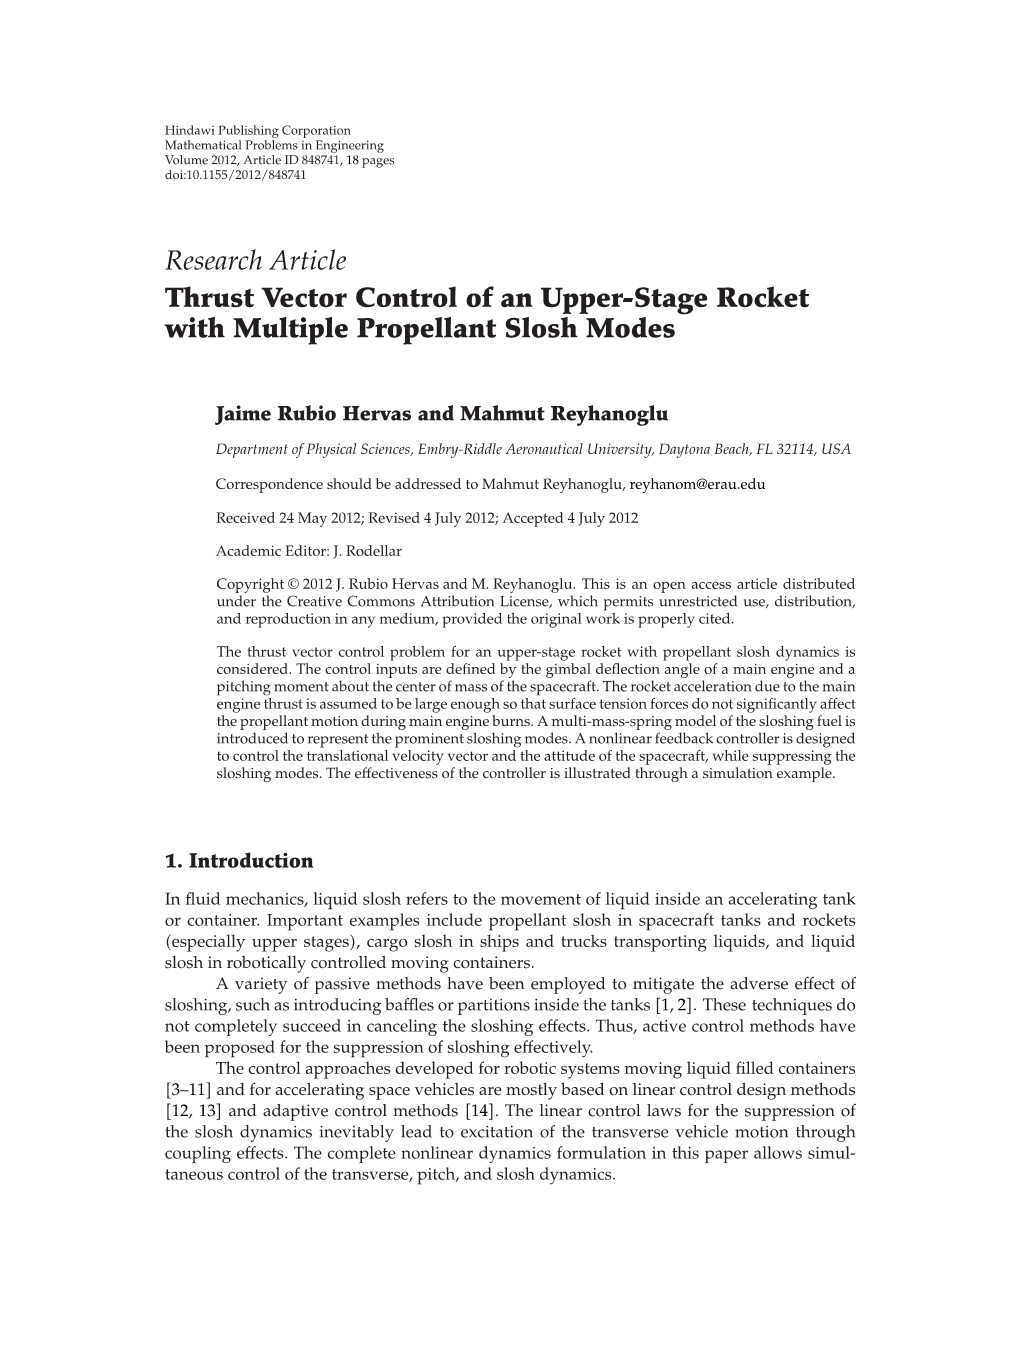 Thrust Vector Control of an Upper-Stage Rocket with Multiple Propellant Slosh Modes